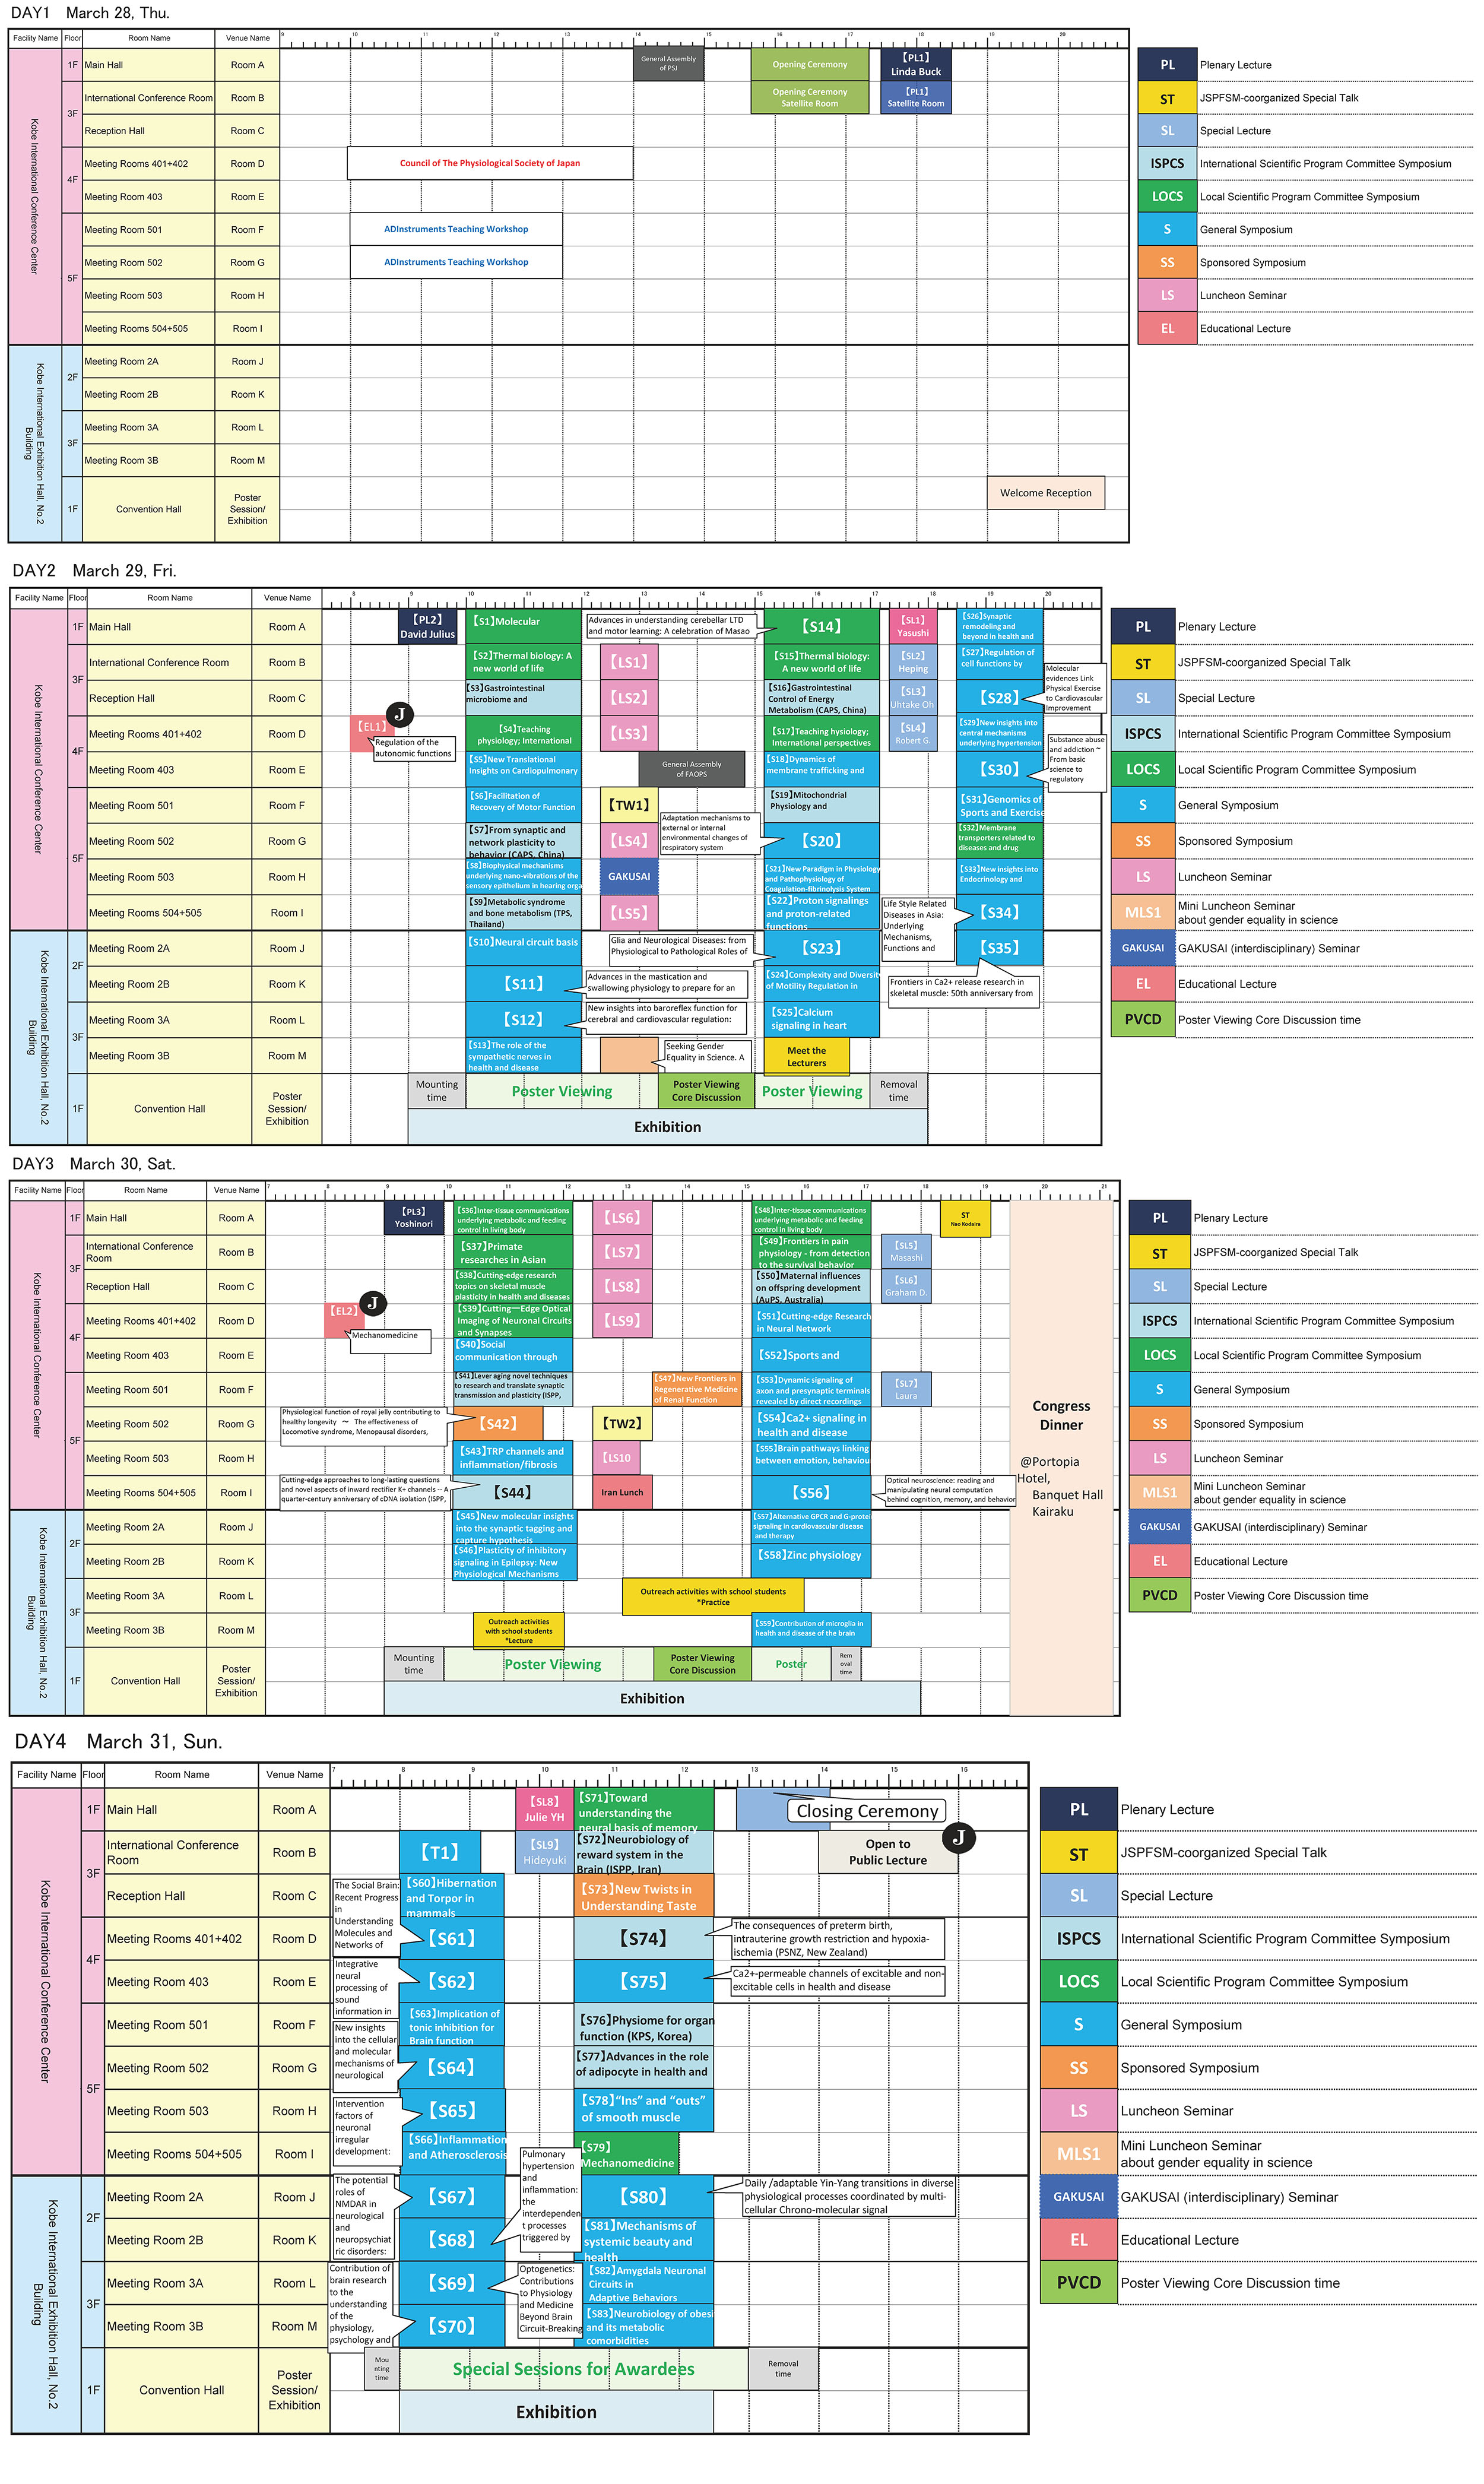 FAOPS2019 | Time Table2500 x 4184